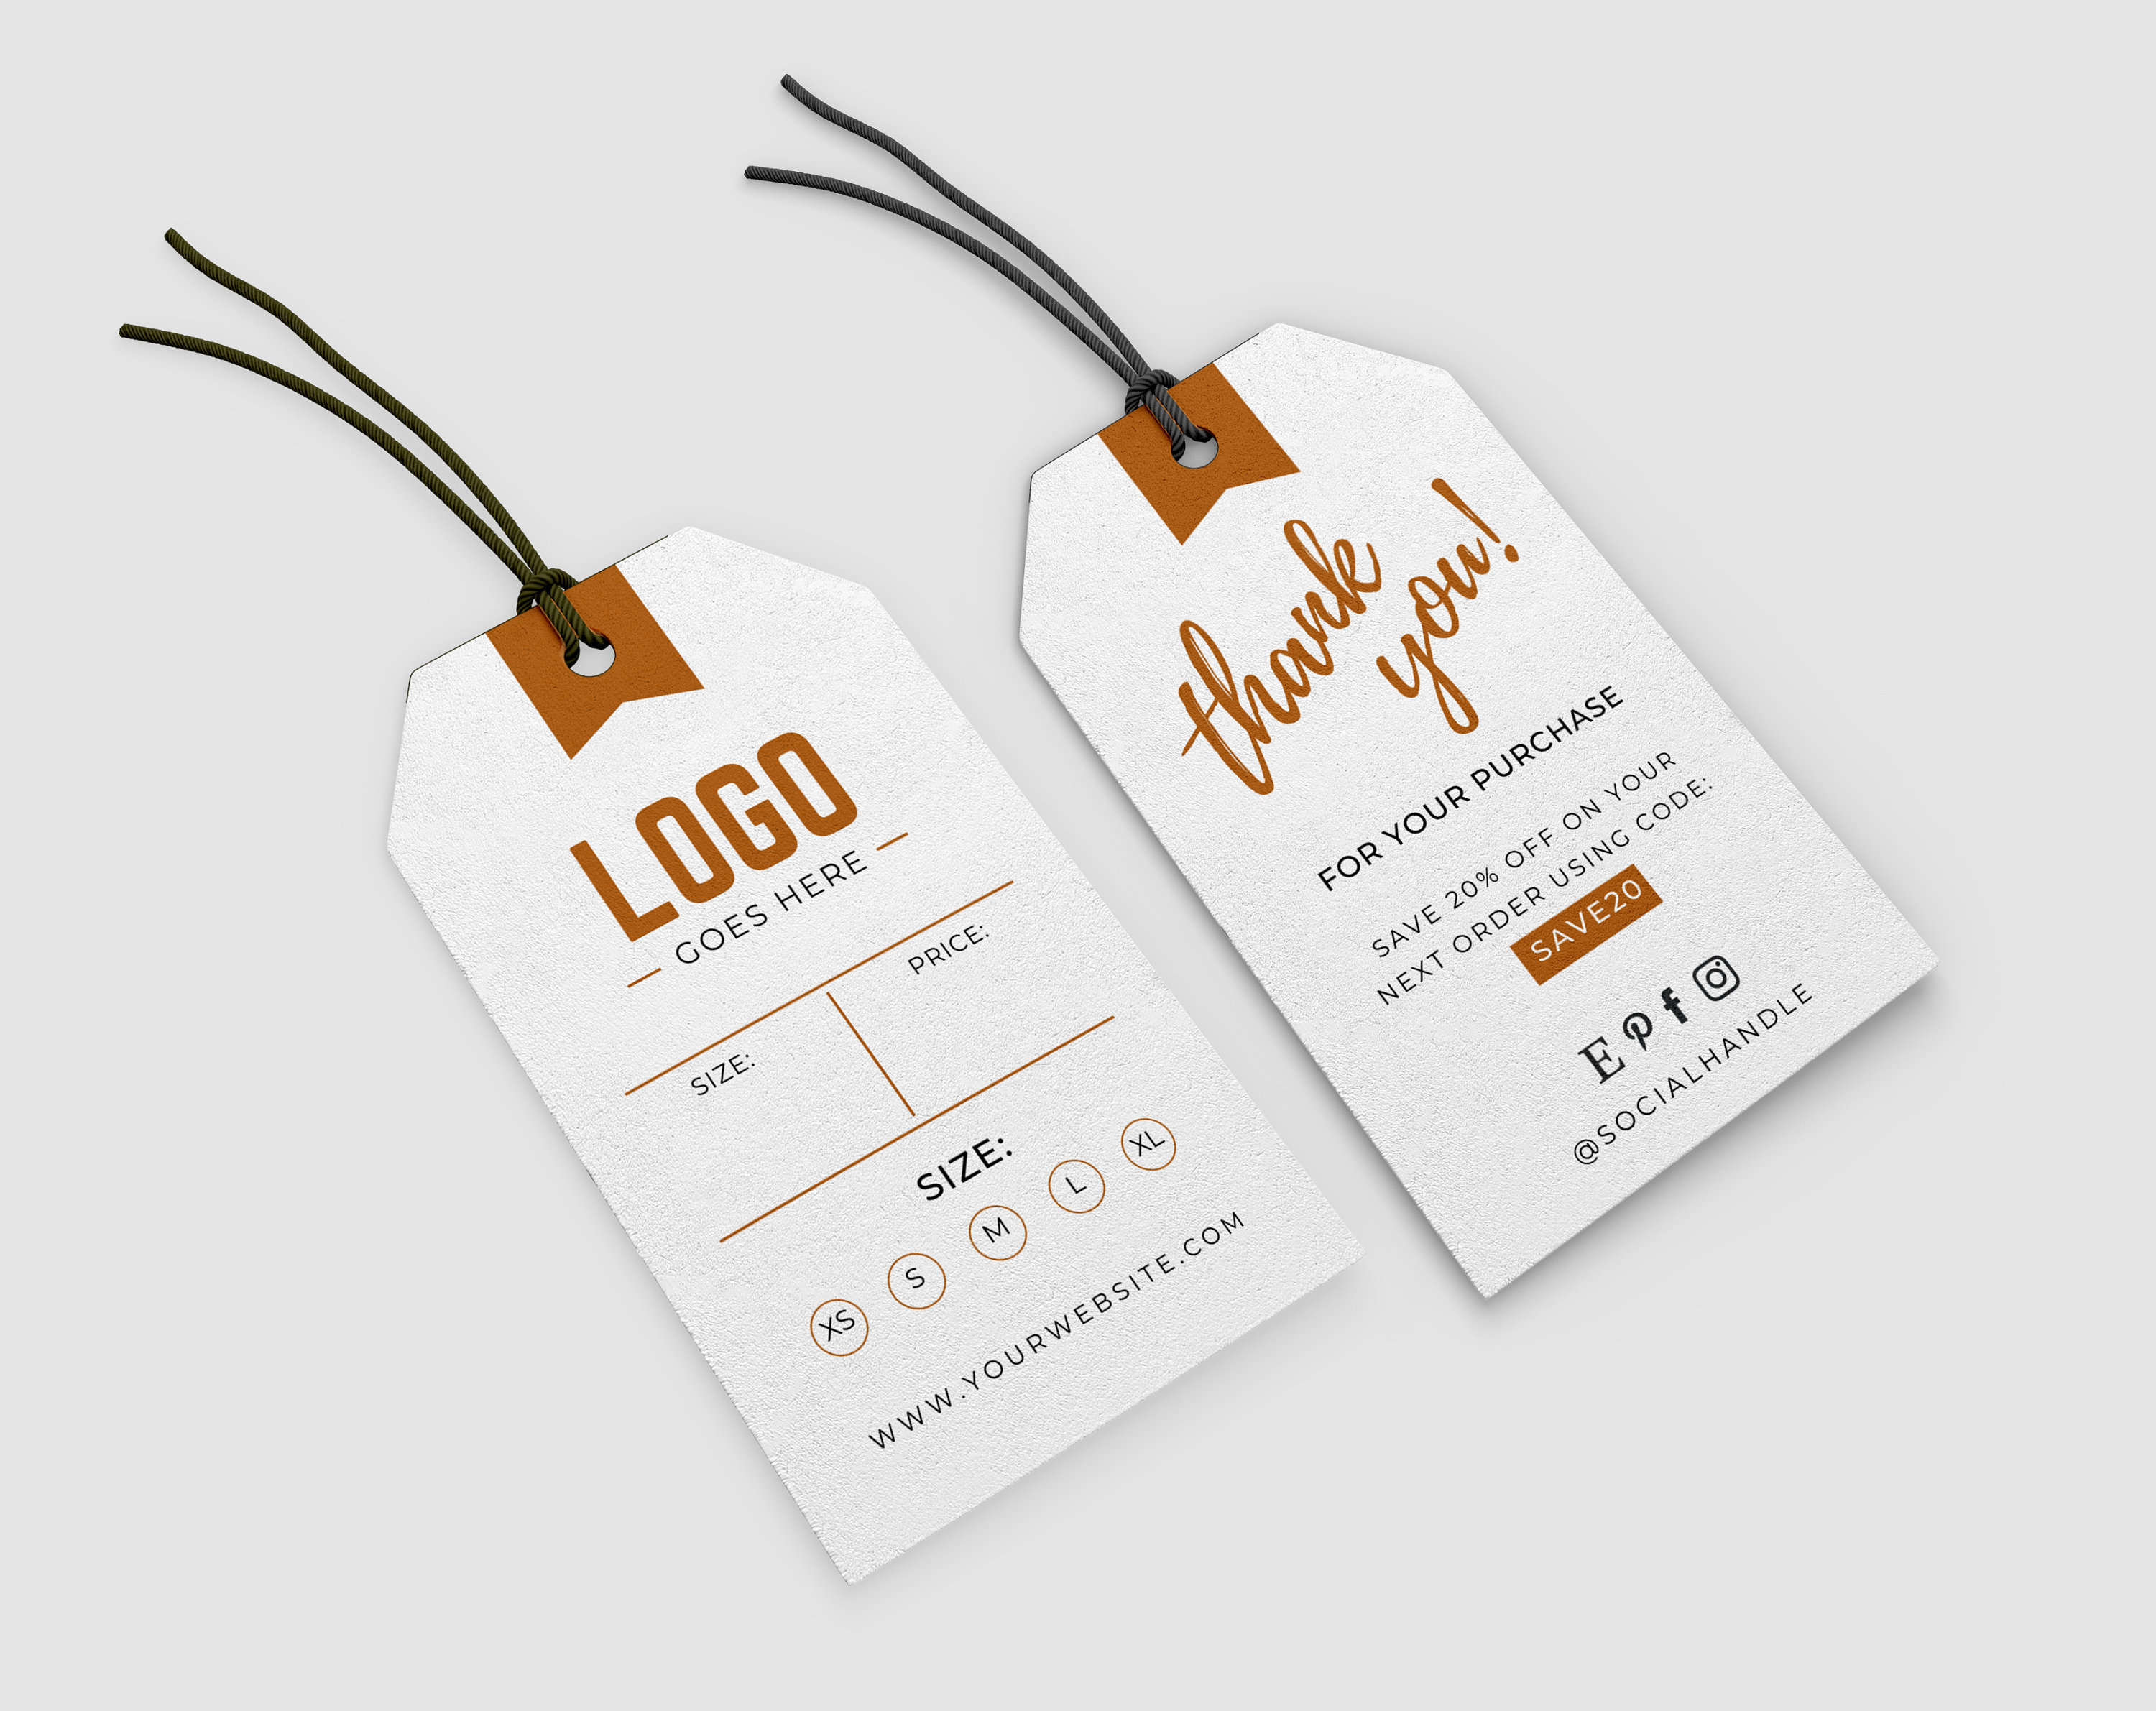 Editable Clothing Hang Tags Template With Washing Instructions Custom Price  Tags & Retail Tags With Business Logo Instant Download 